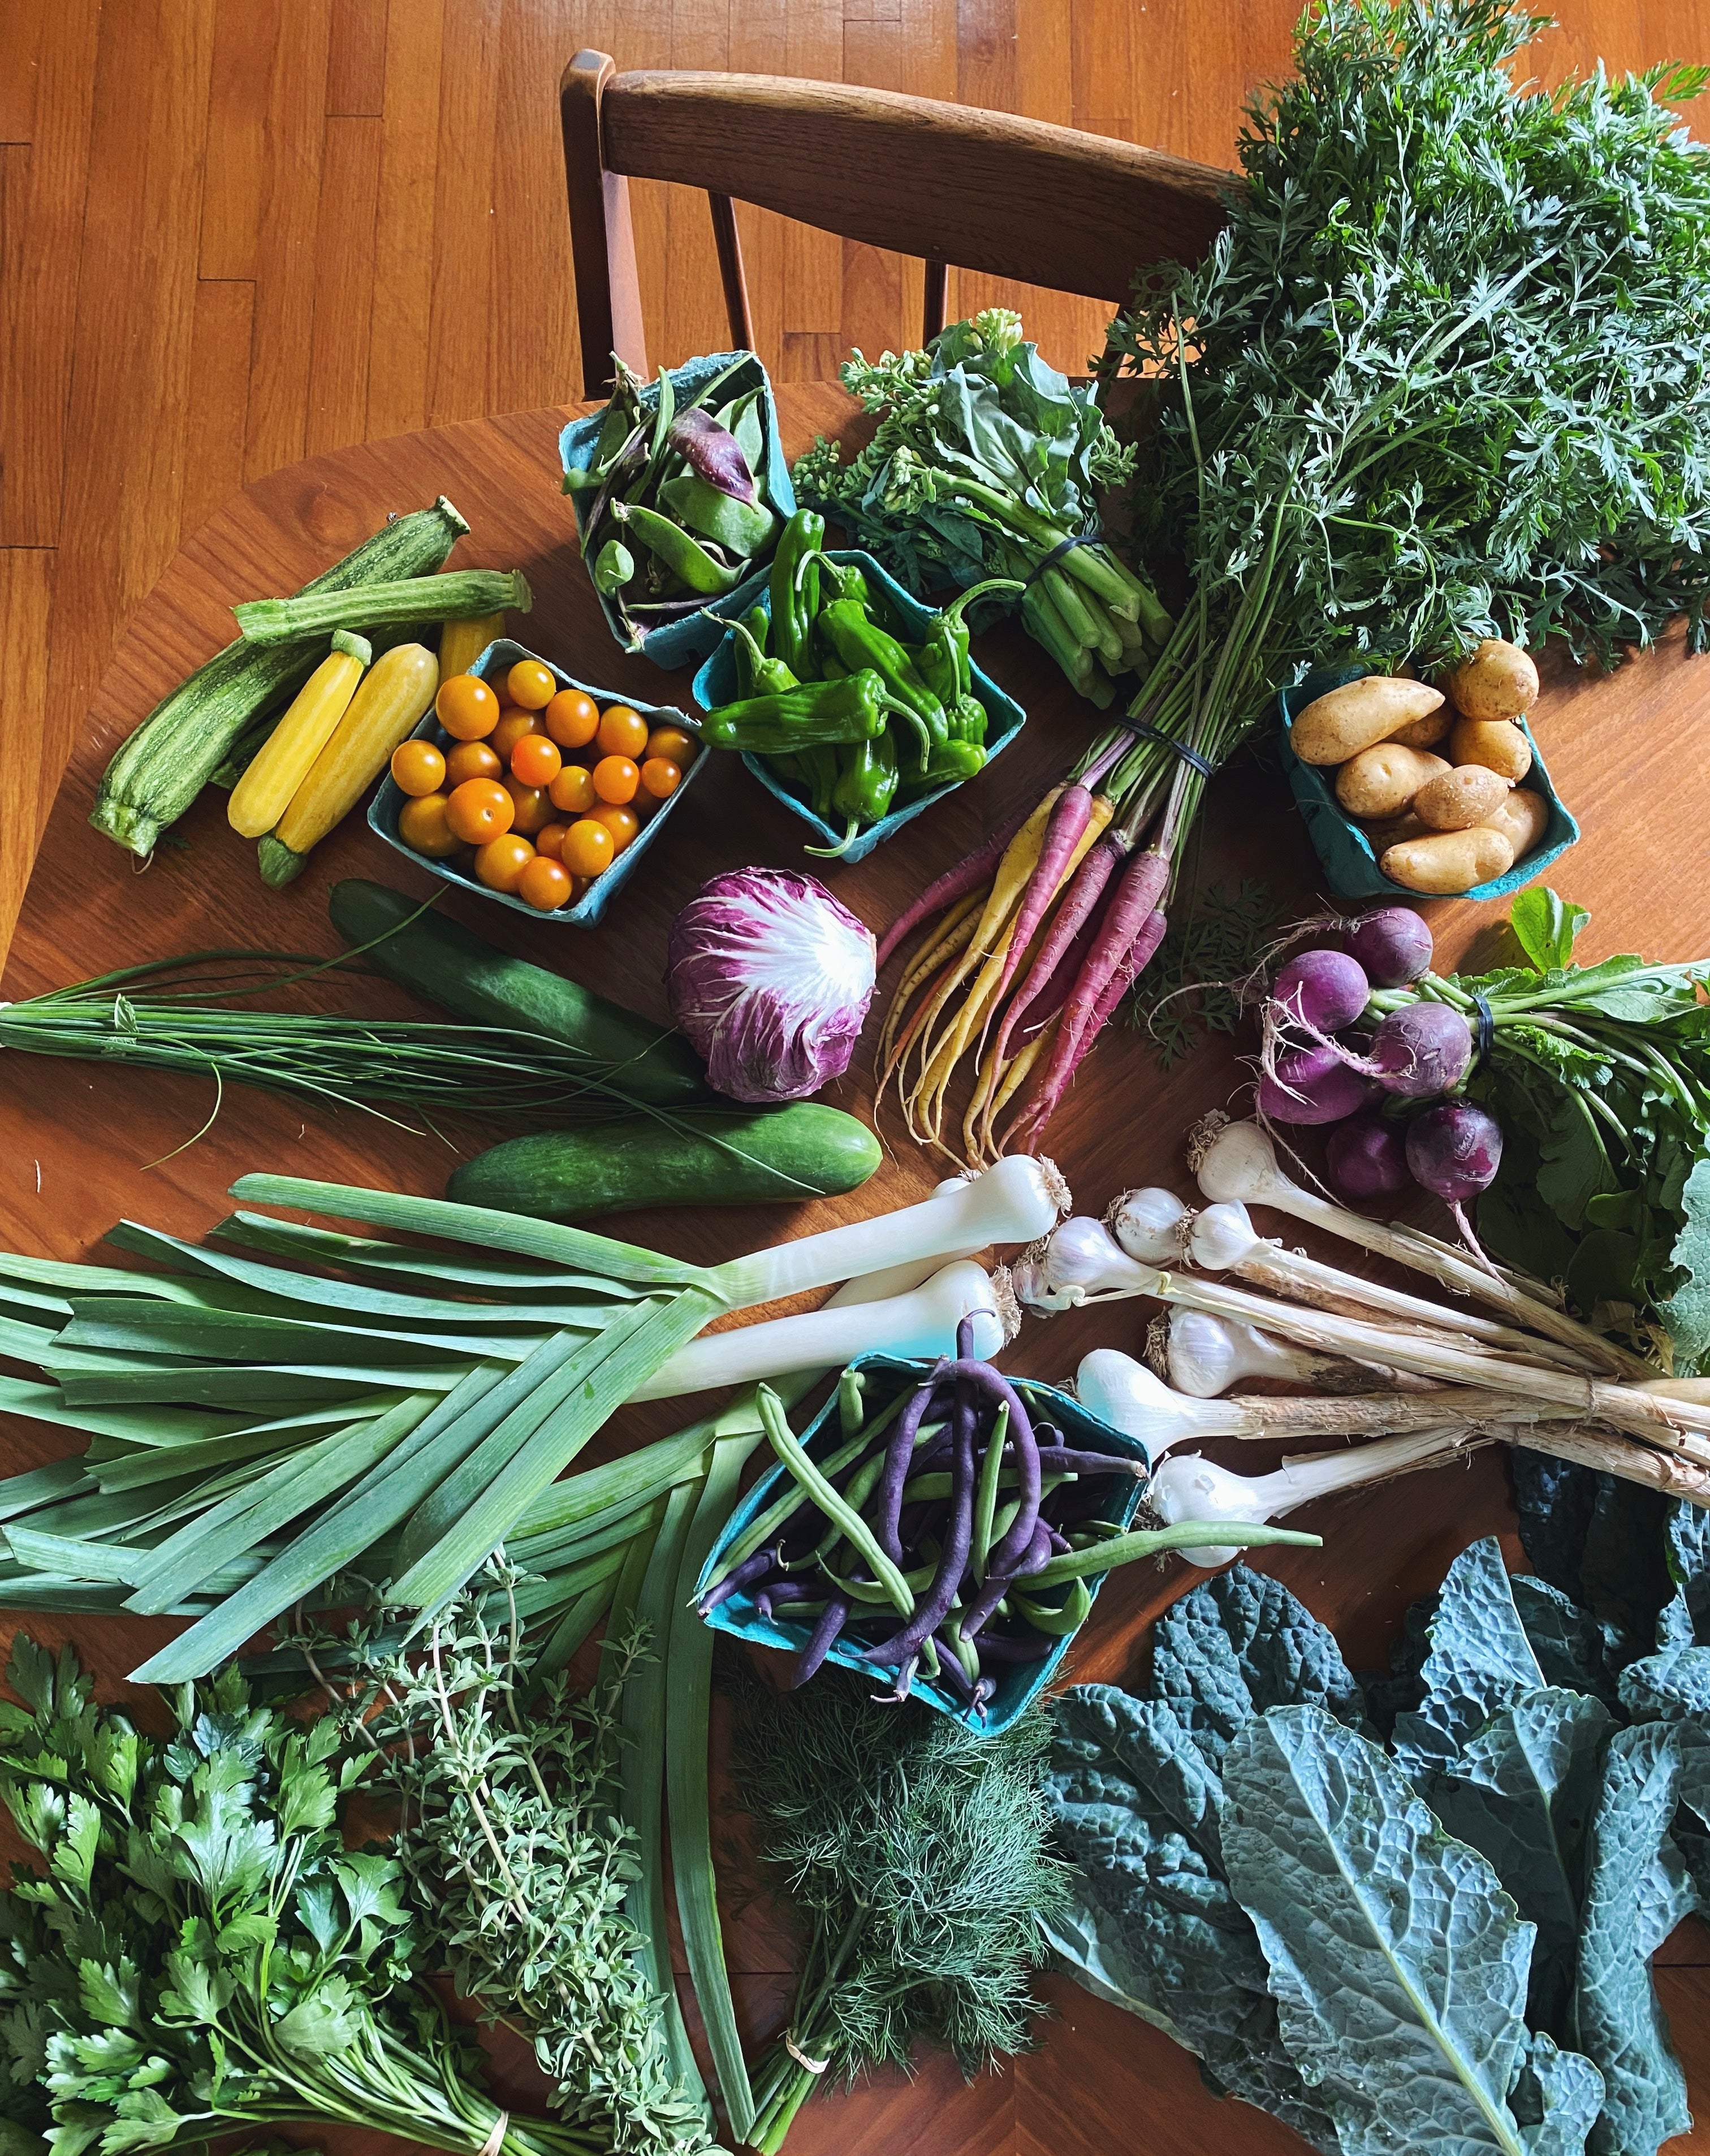 a farmers market haul of leafy greens and root vegetables atop a wooden table